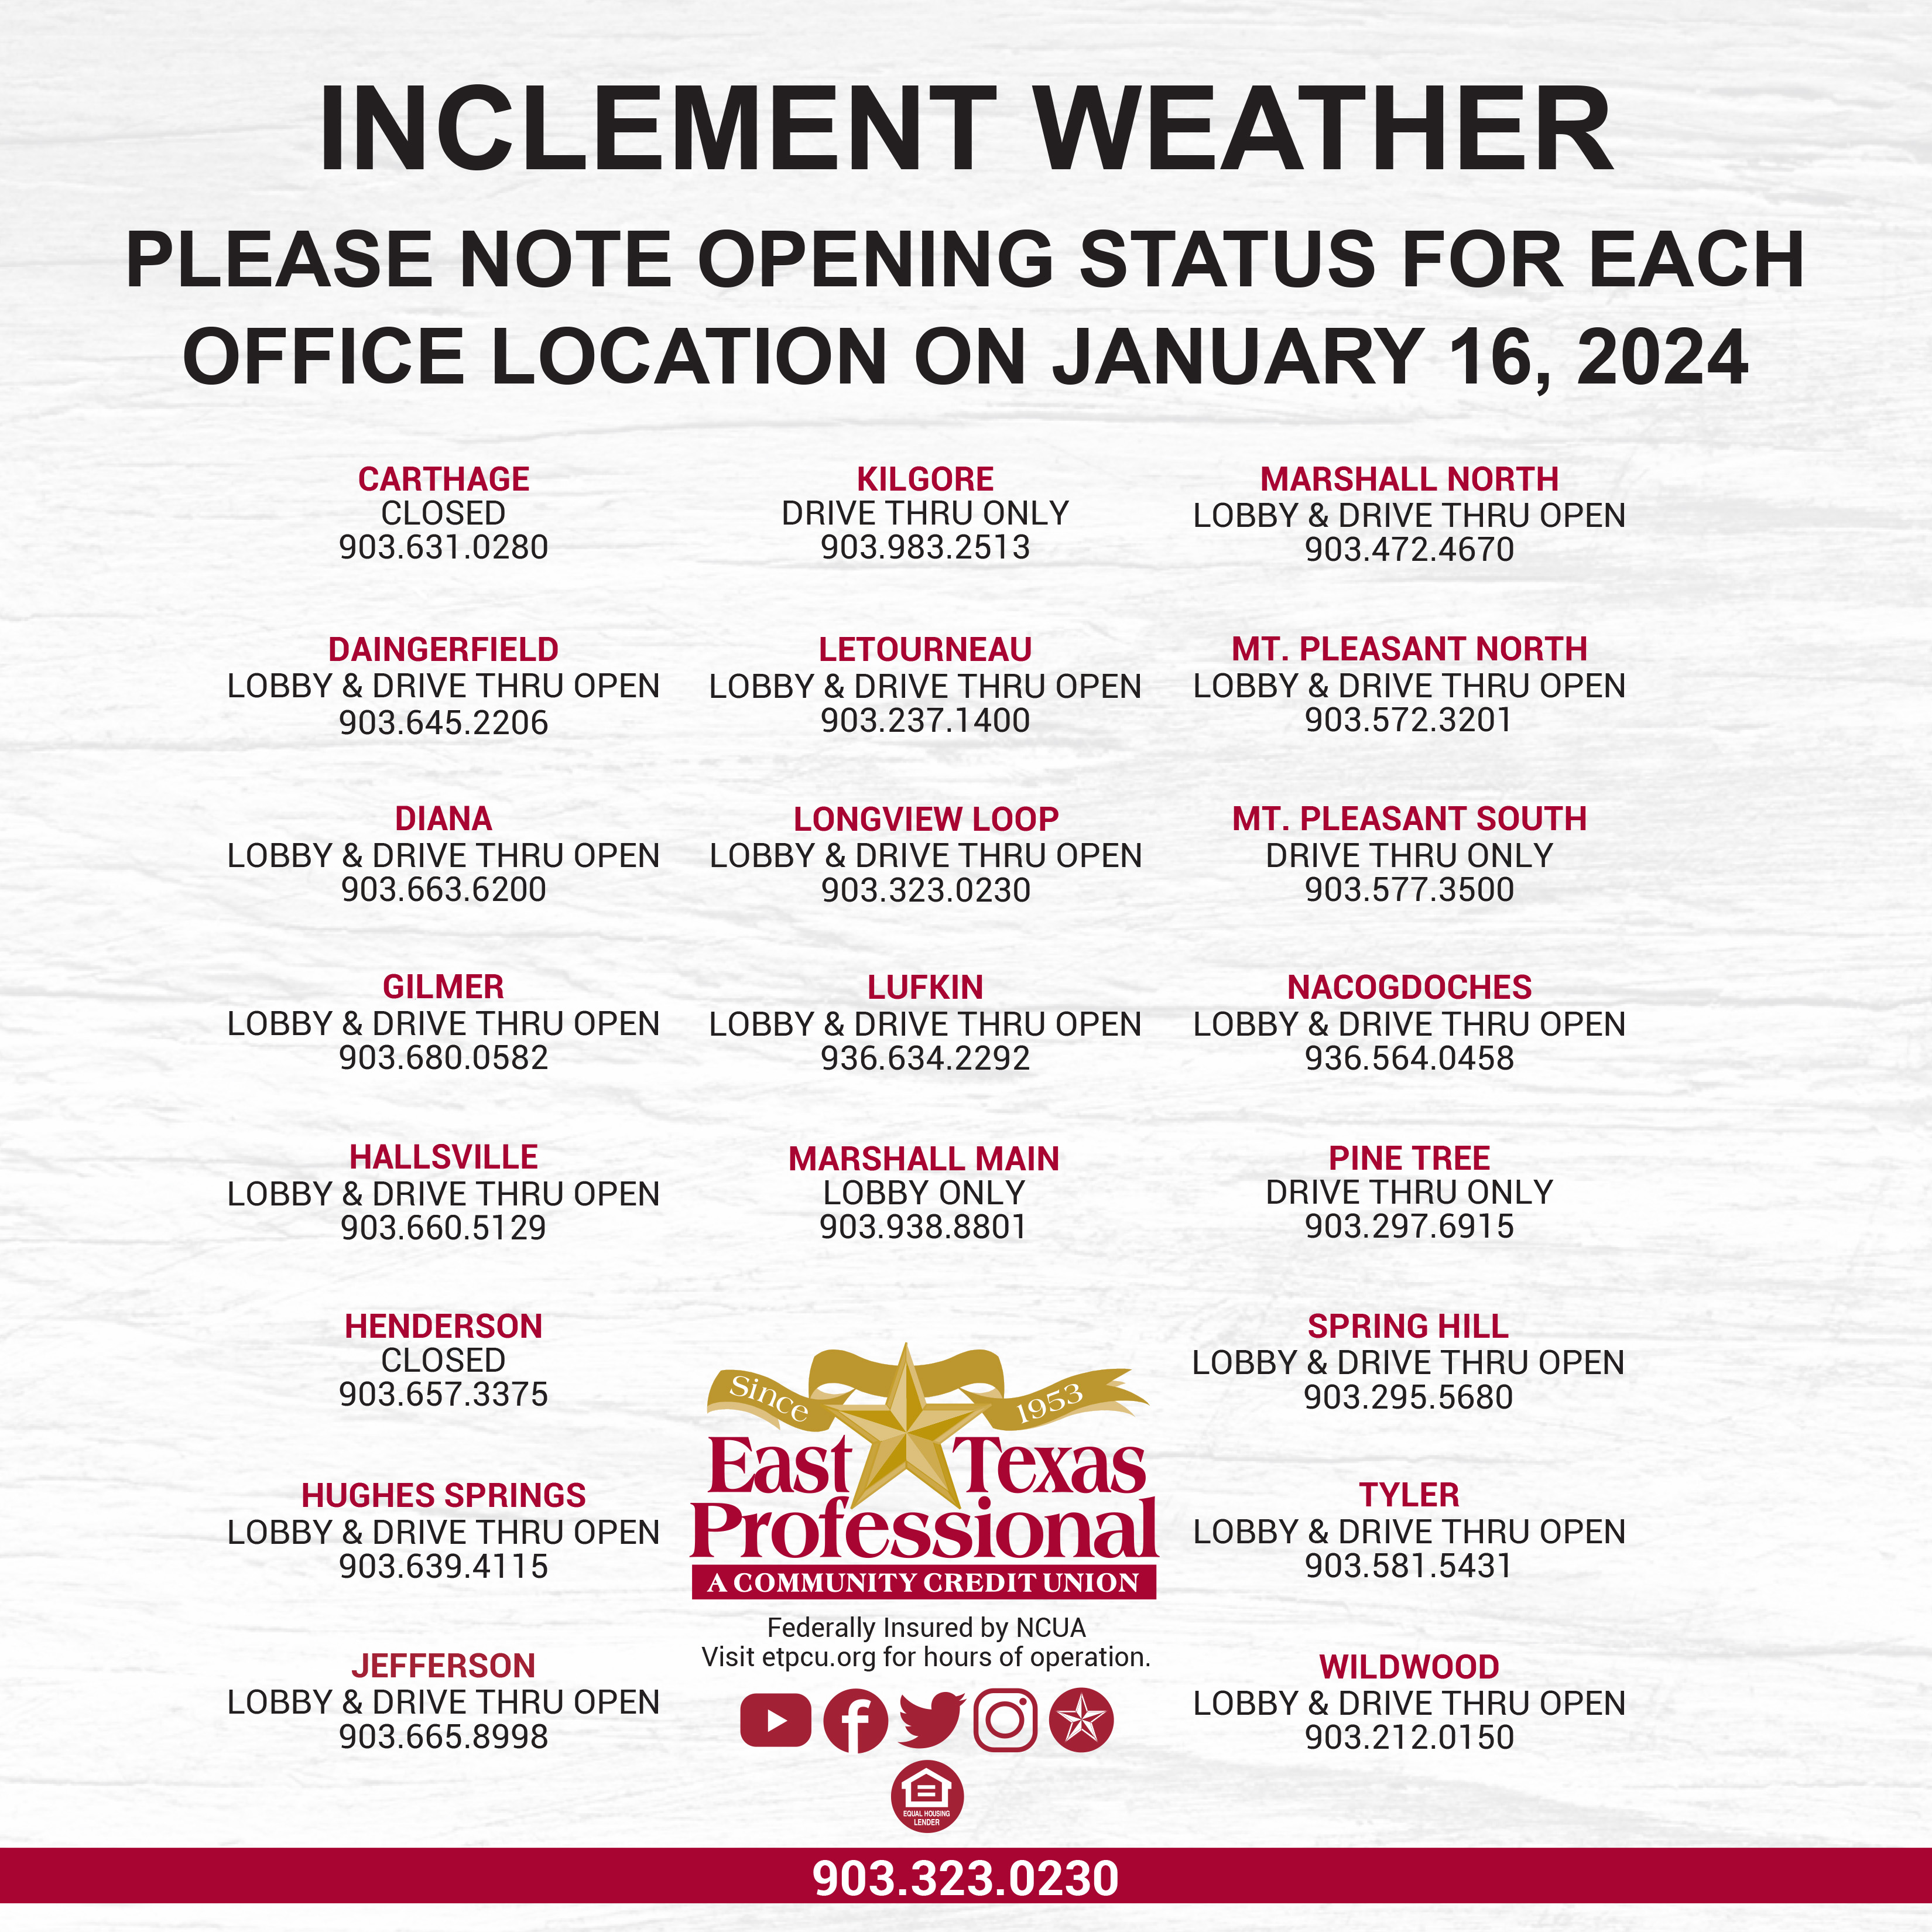 iNCLEMENT WEATHER OFFICE OPENINGS 1.16.24